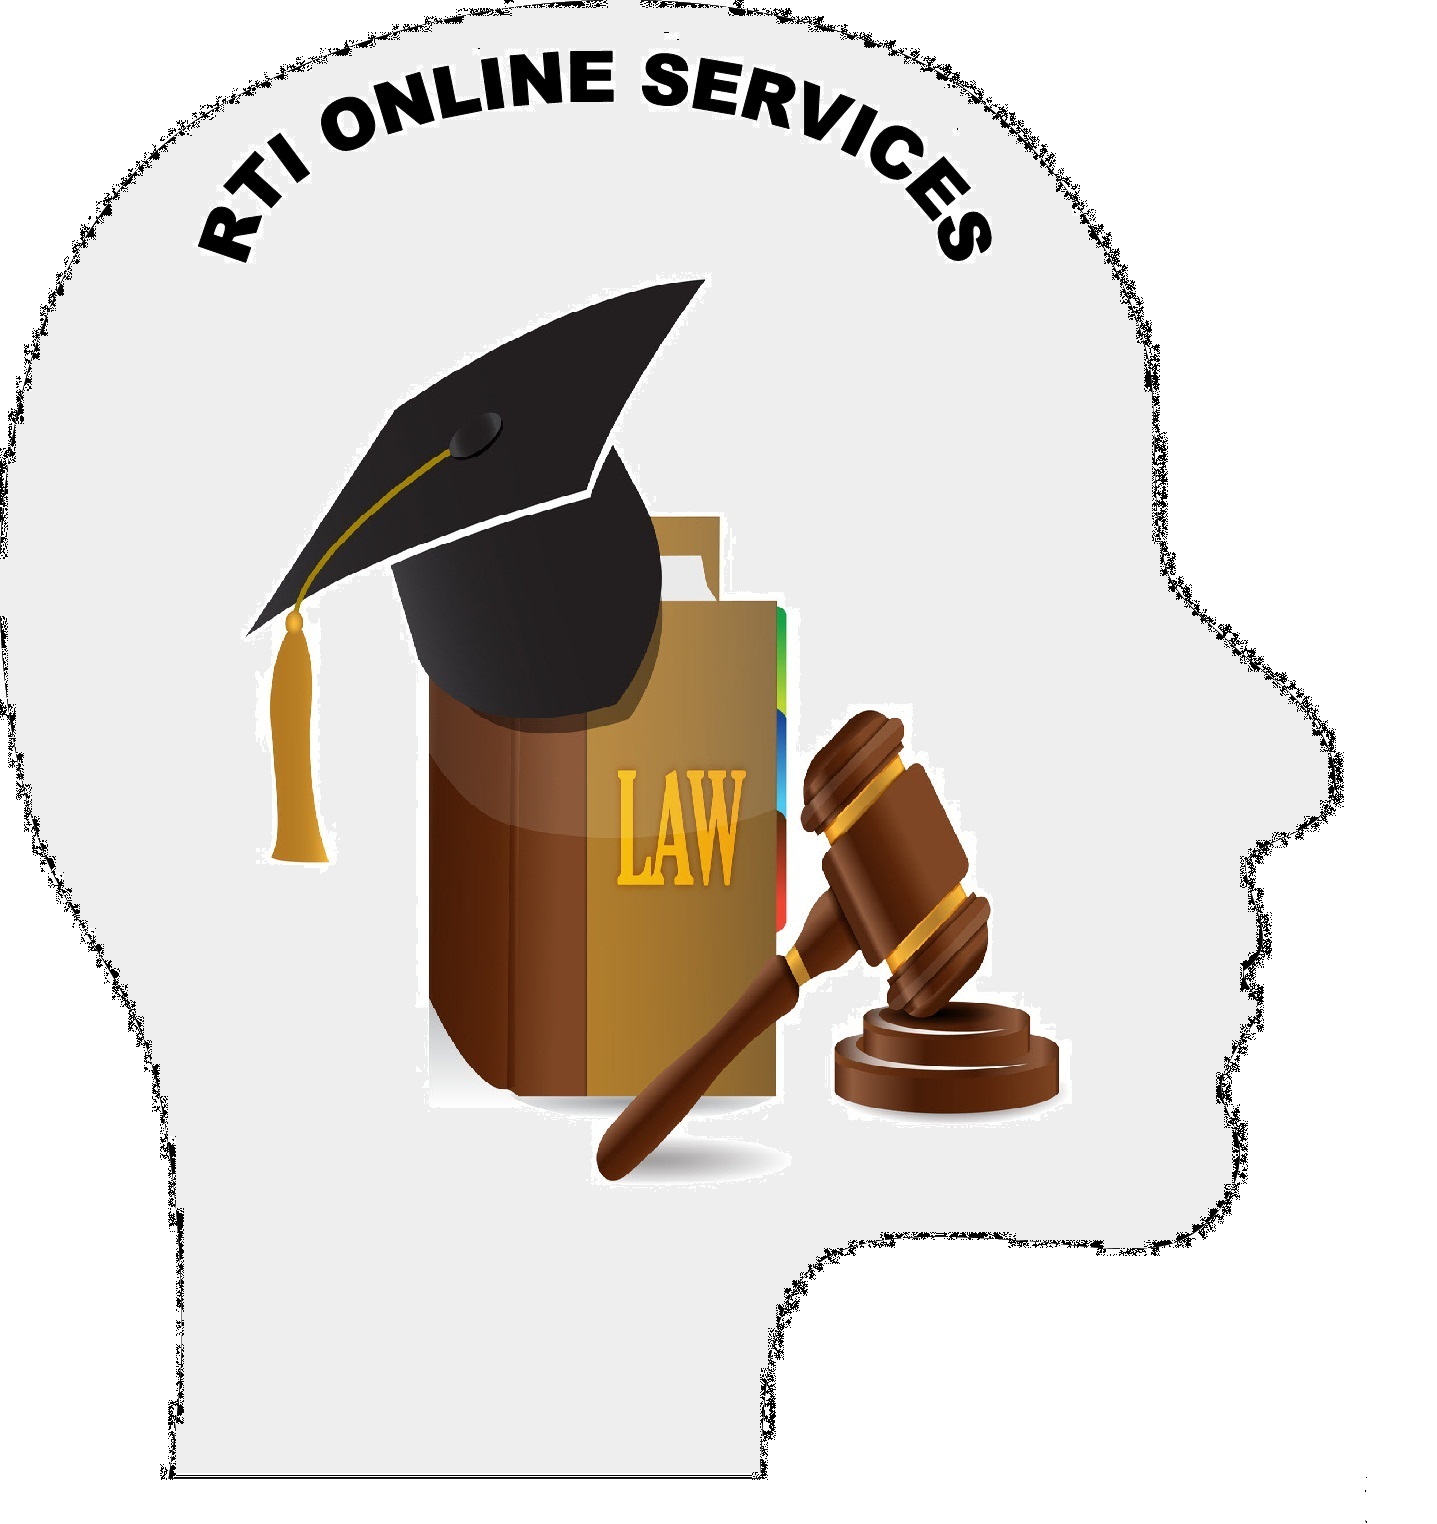 RTI ONLINE SERVICES|Legal Services|Professional Services